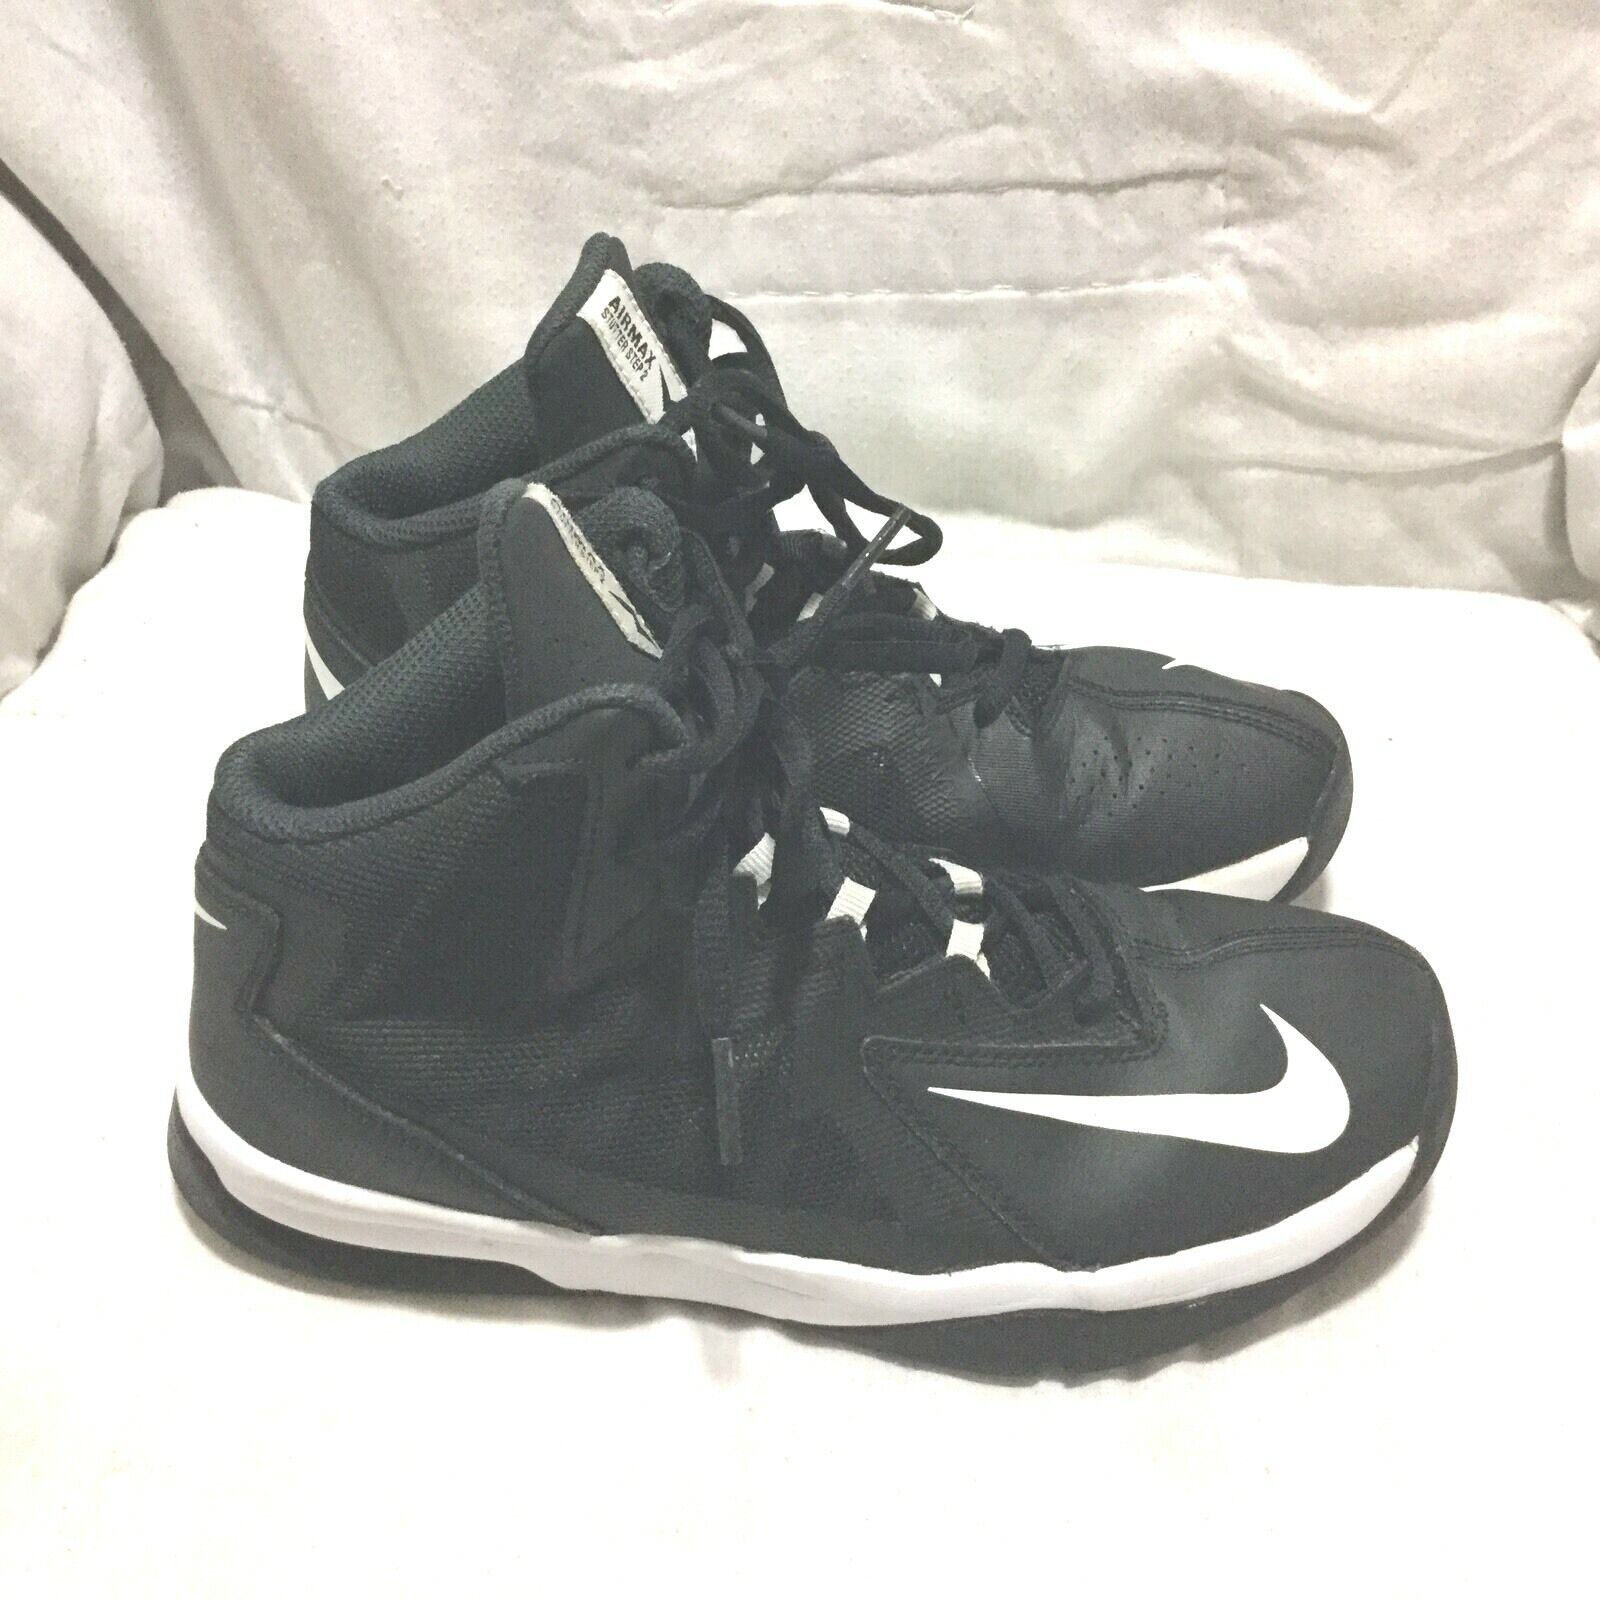 Nike Airmax Stutter Step 2 Basketball Shoes Black White ( Size 5y ) Youth